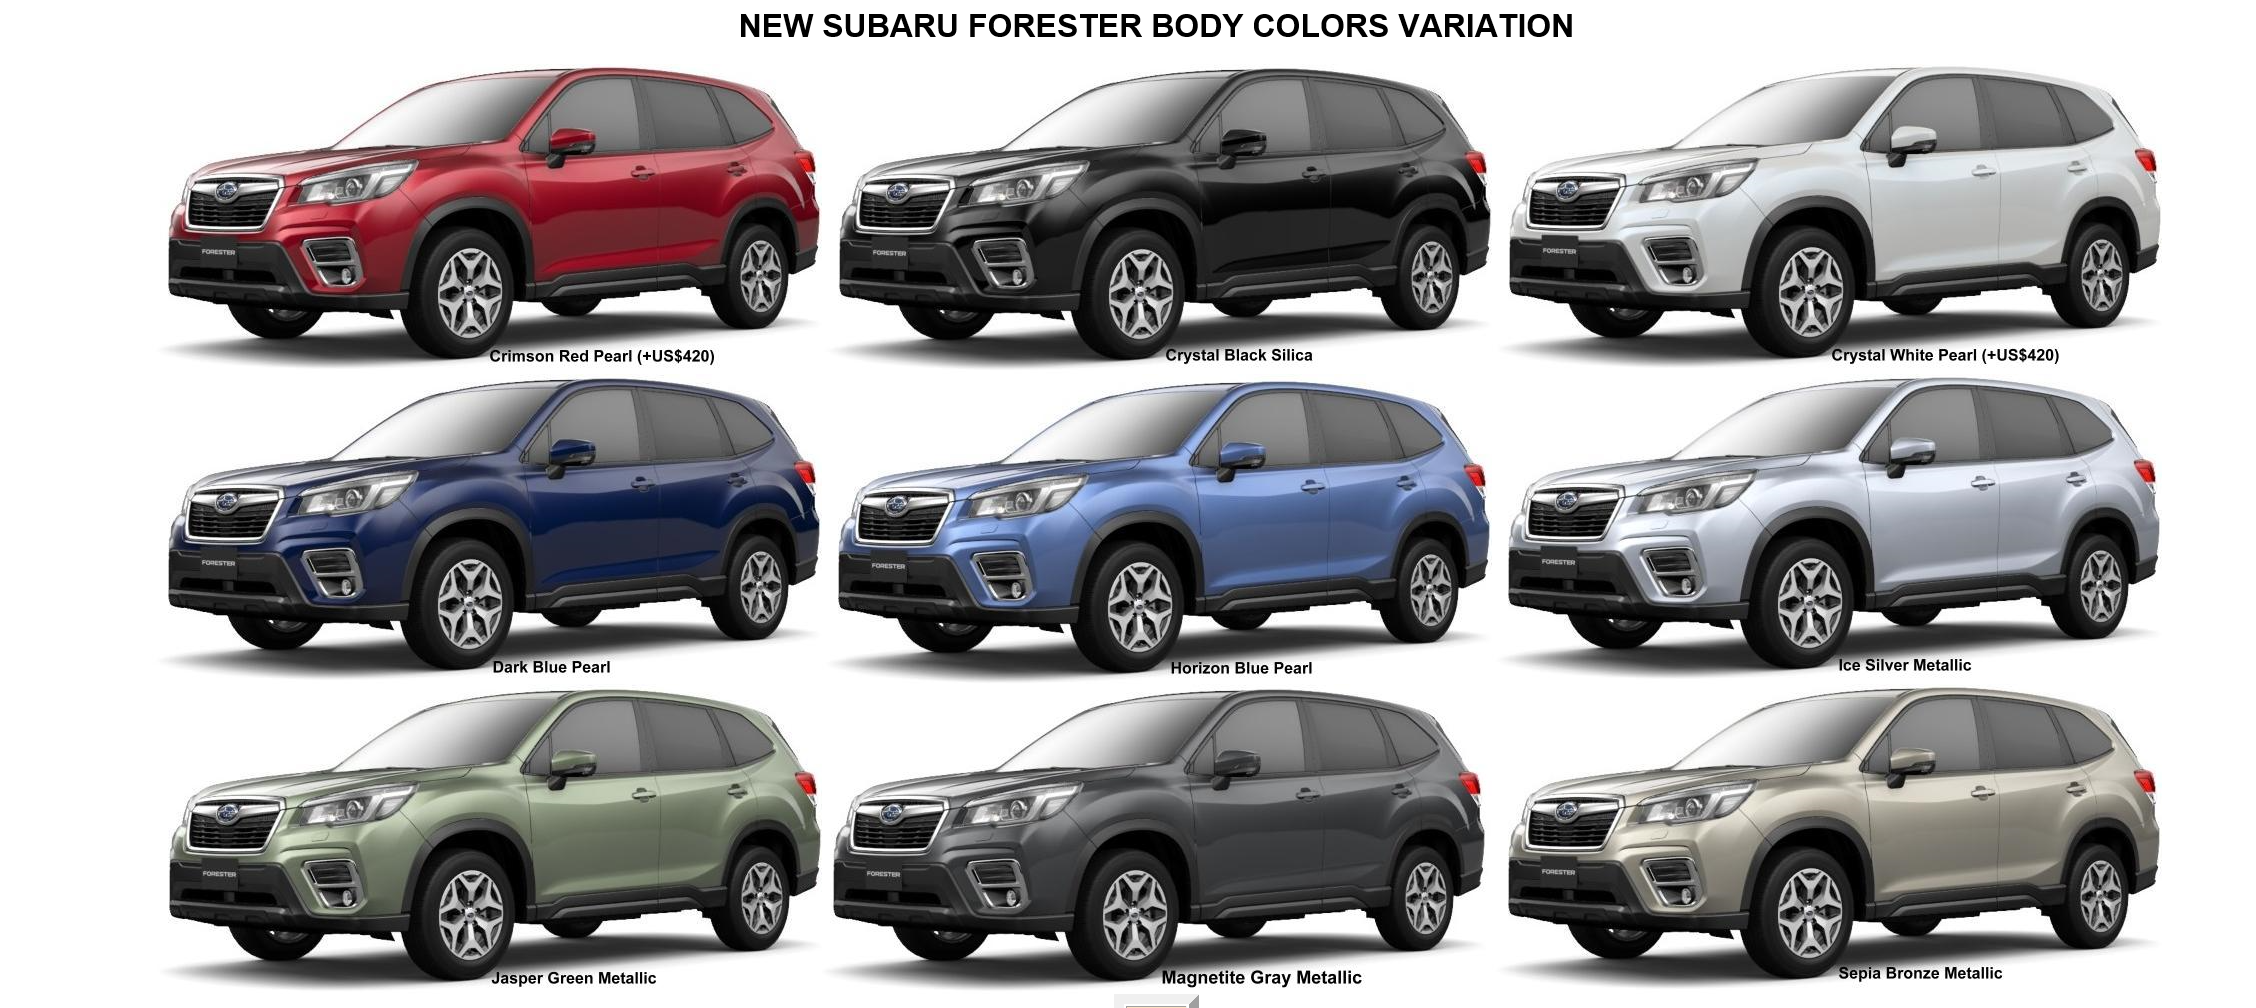 New Subaru Forester Body colors, Full variation of exterior colours selecti...